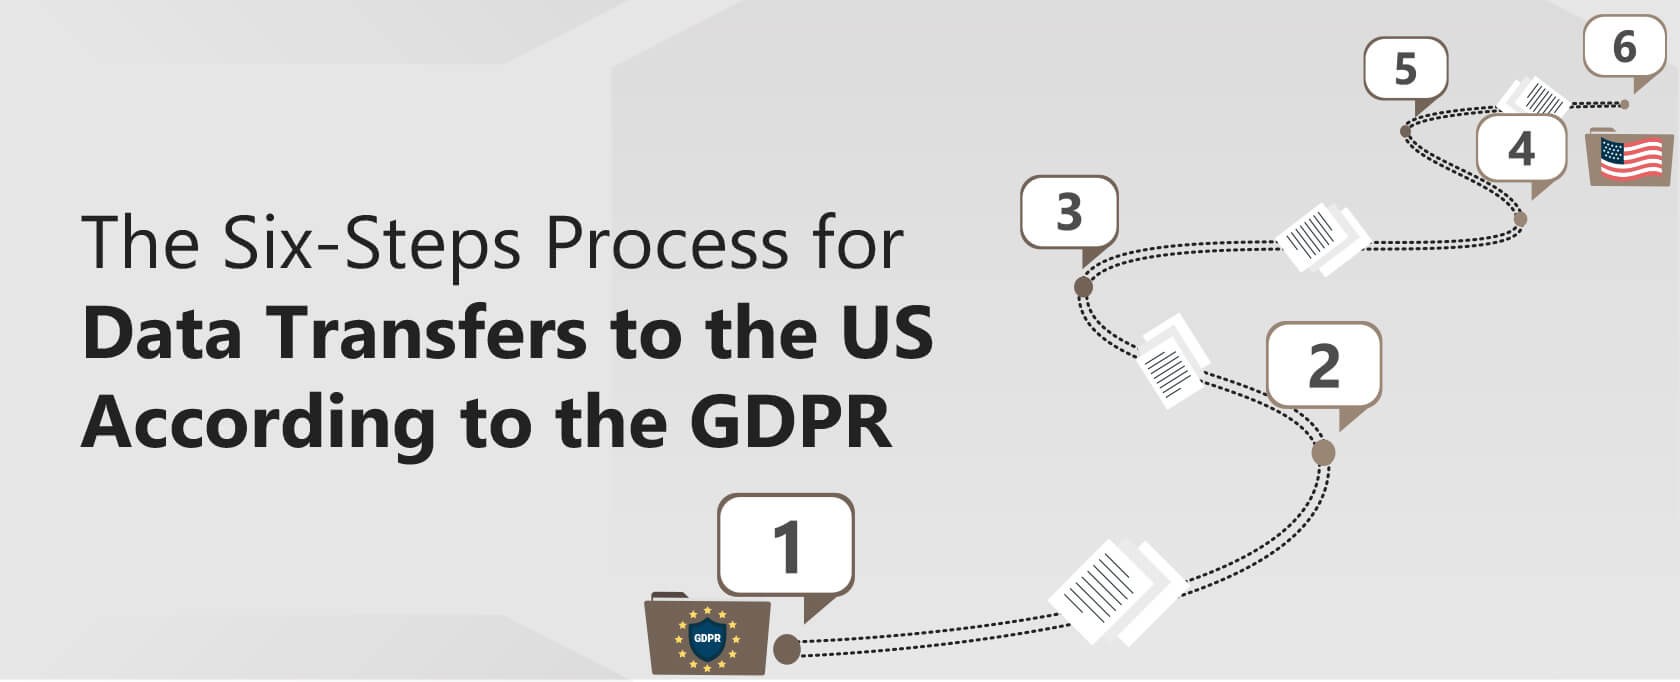 The Six-Steps Process for Data Transfers to the US According to the GDPR